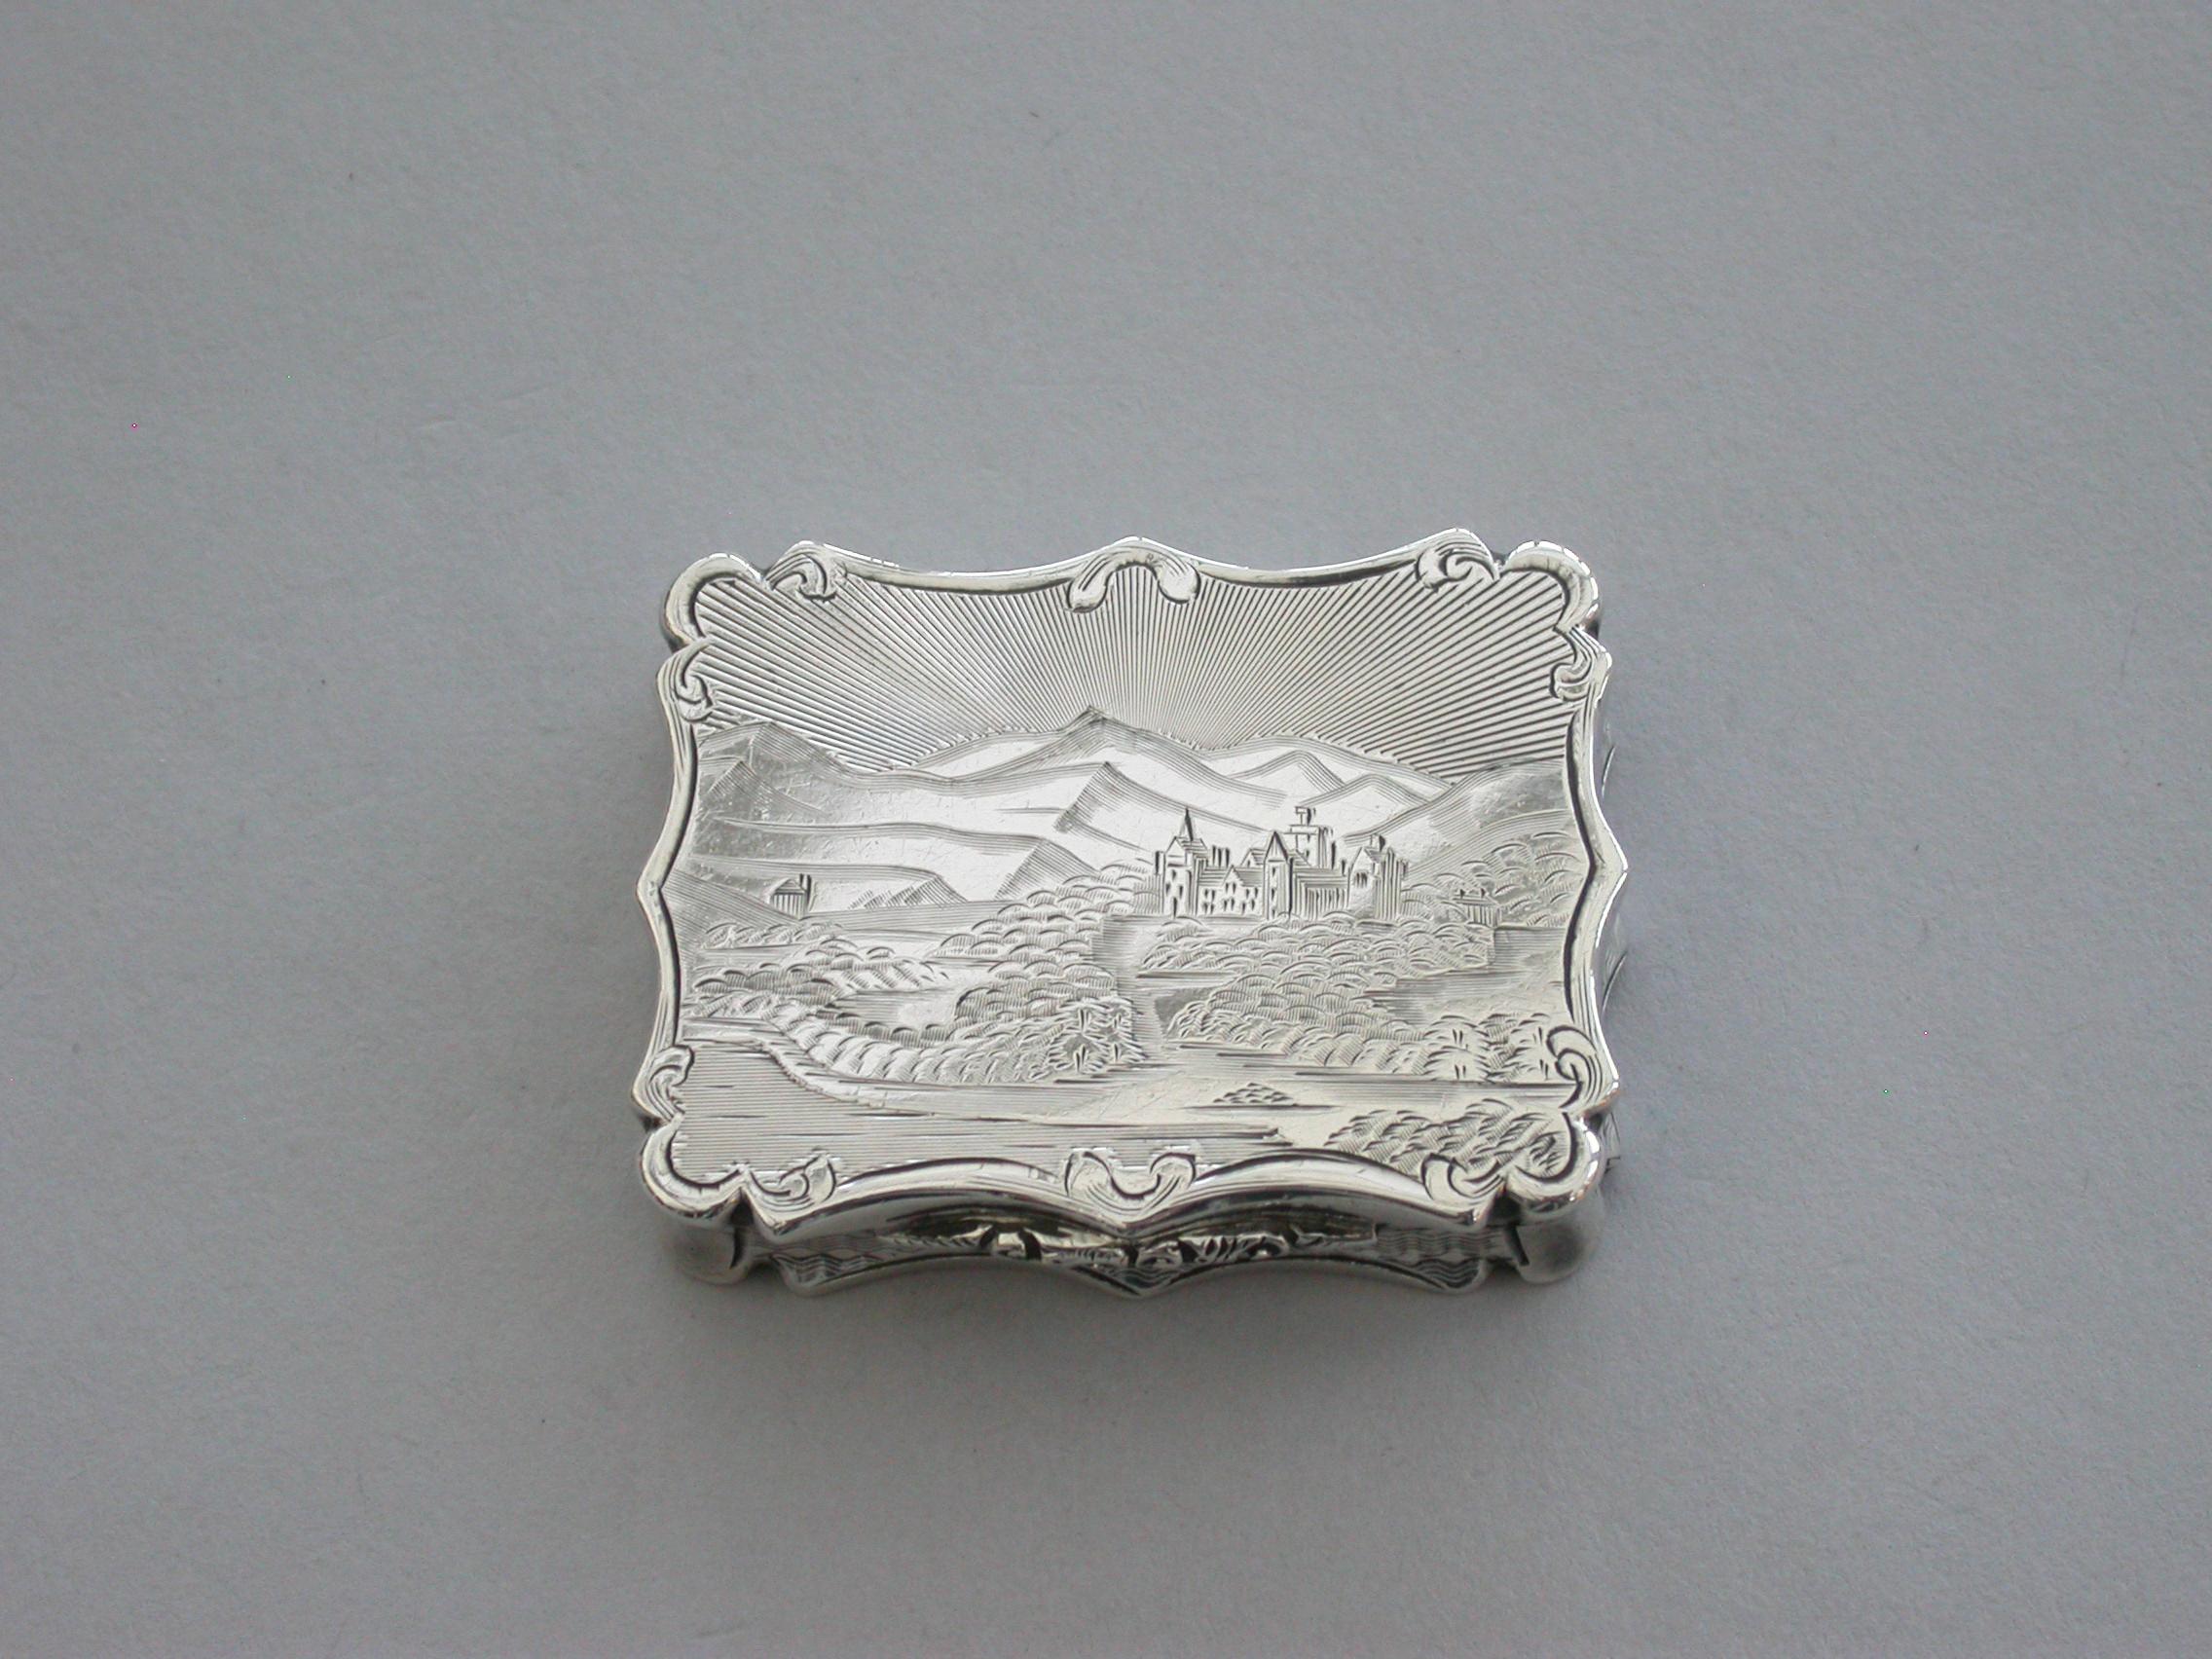 A rare Victorian silver Vinaigrette of shaped rectangular form, the base and sides with engine turned decoration and a vacant cartouche. The lid engraved with a scene depicting Old Balmoral castle and lands with small buildings against hills and a